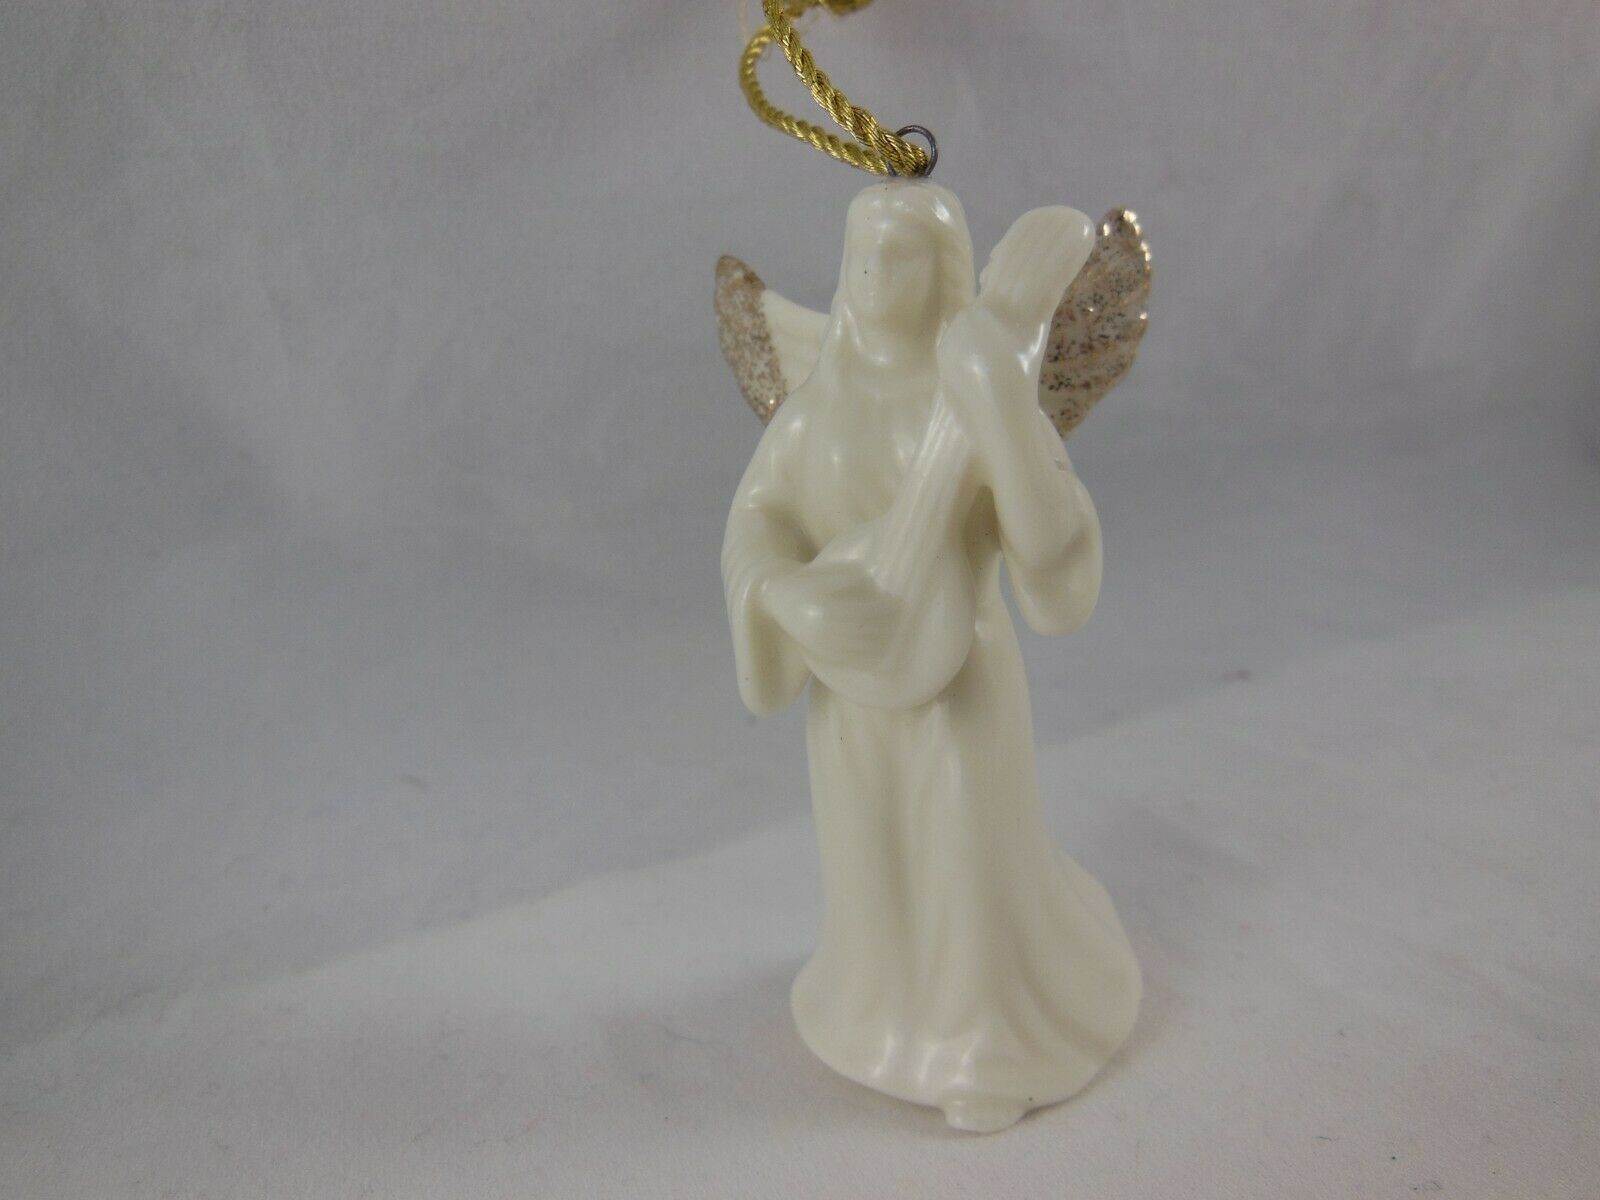 Primary image for Mikasa Porcelain Angel Christmas Ornament Playing musical Instrument 2.75"